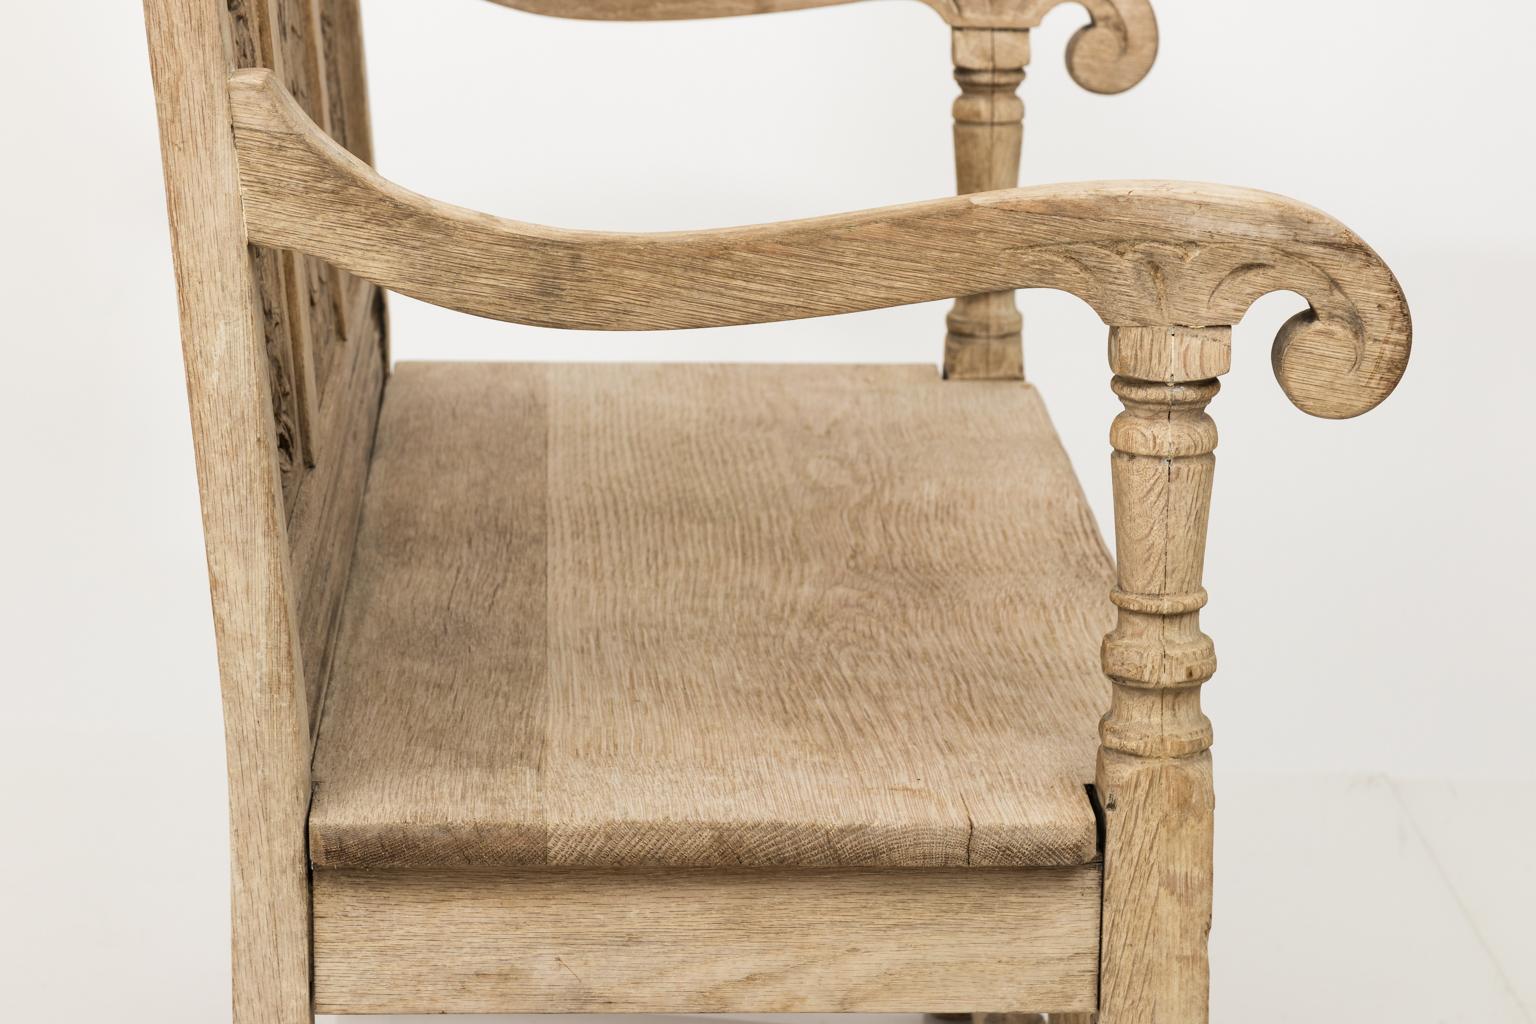 Heavily carved American made Jacobean style bench in bleached oak that features foliaged shallow relief carvings on three-seat back panels, scrolled arms, and bulb turned legs, circa 1902.